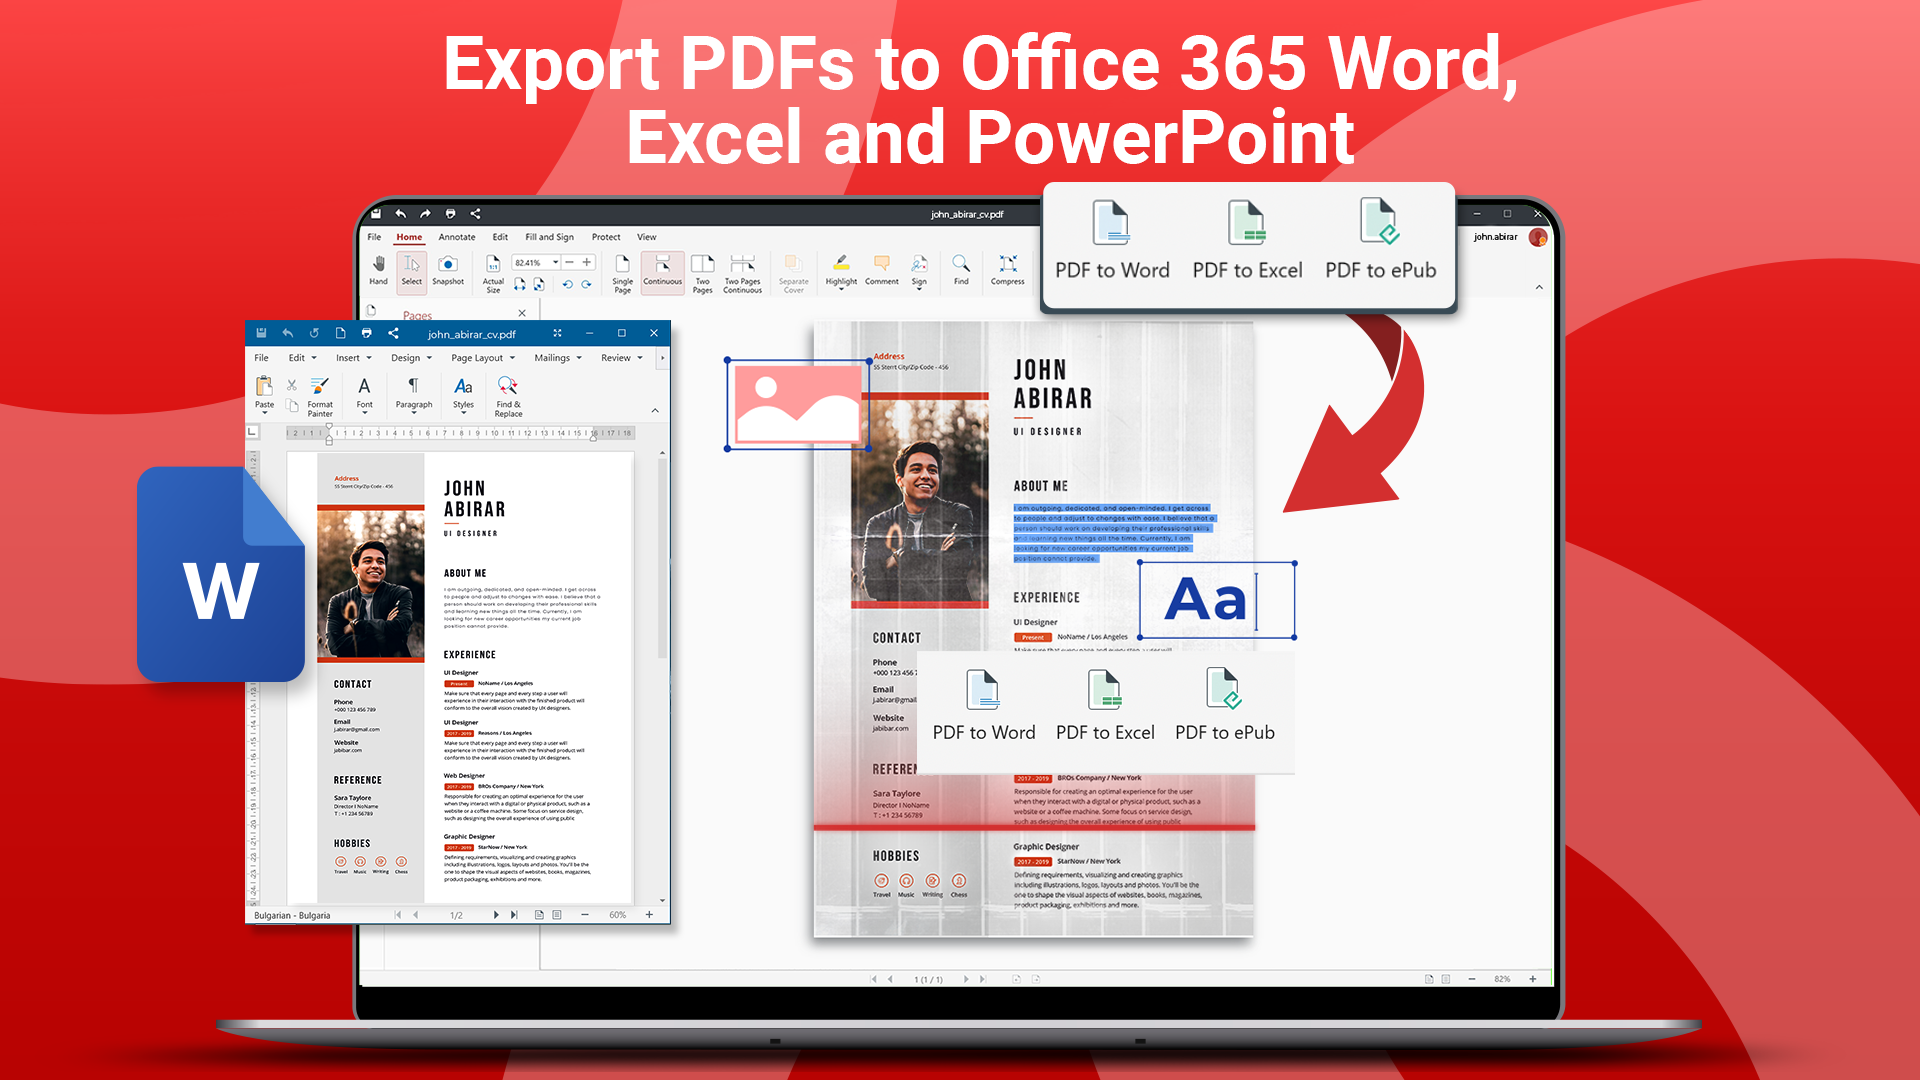 Export PDFs to Office 365 Word, Excel and PowerPoint